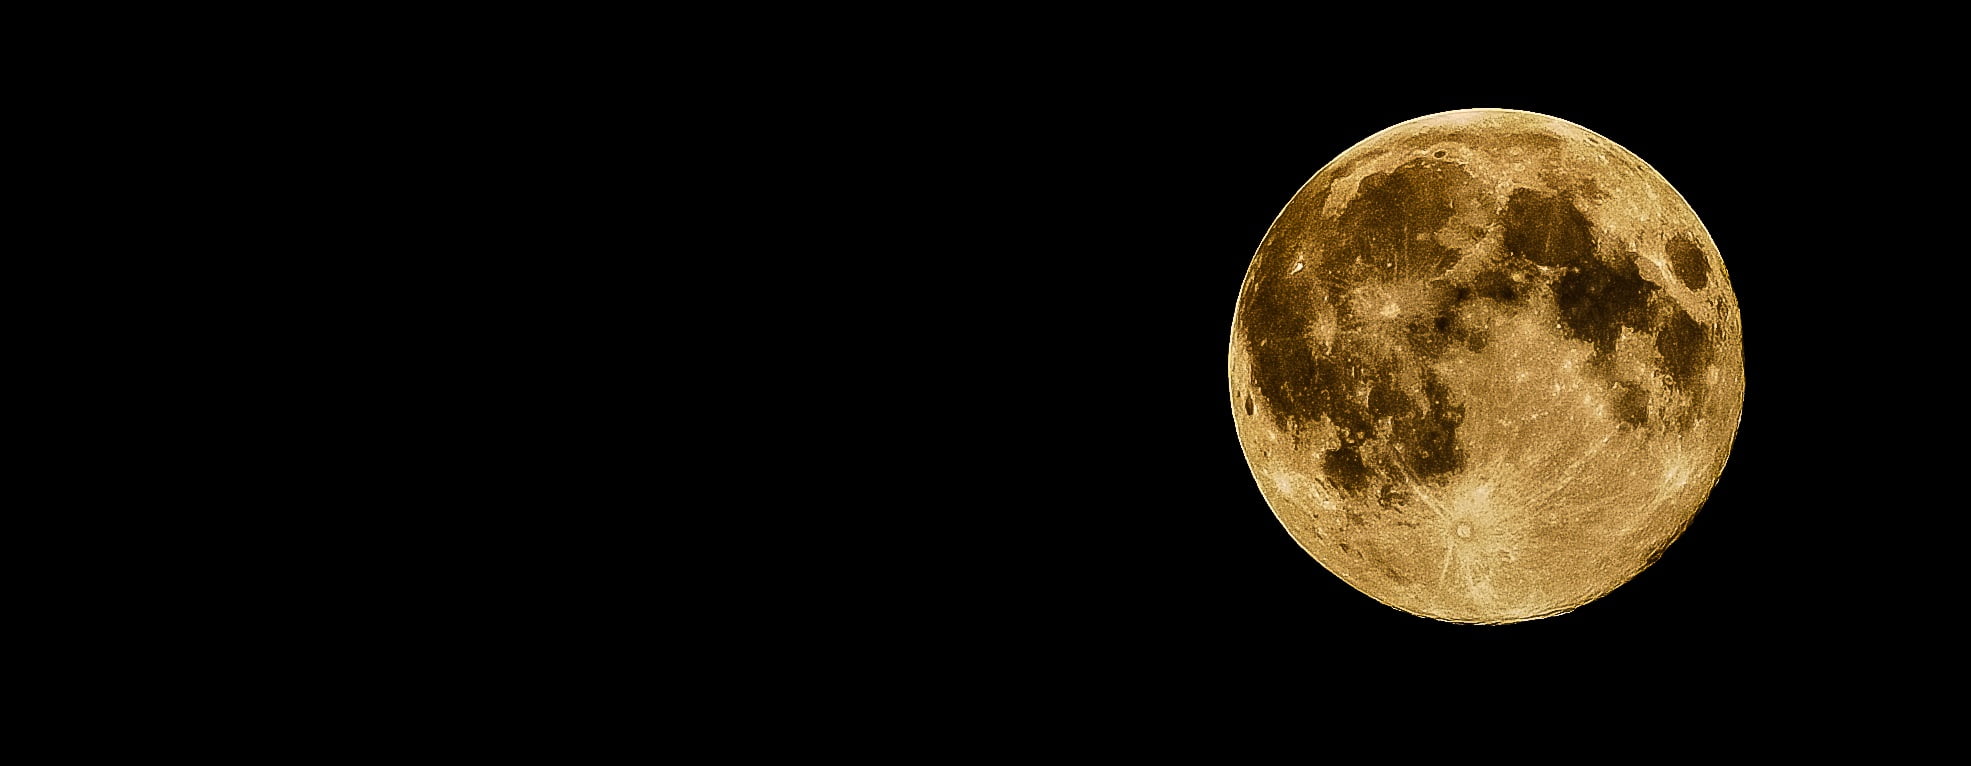 low angle photography of full moon under black background